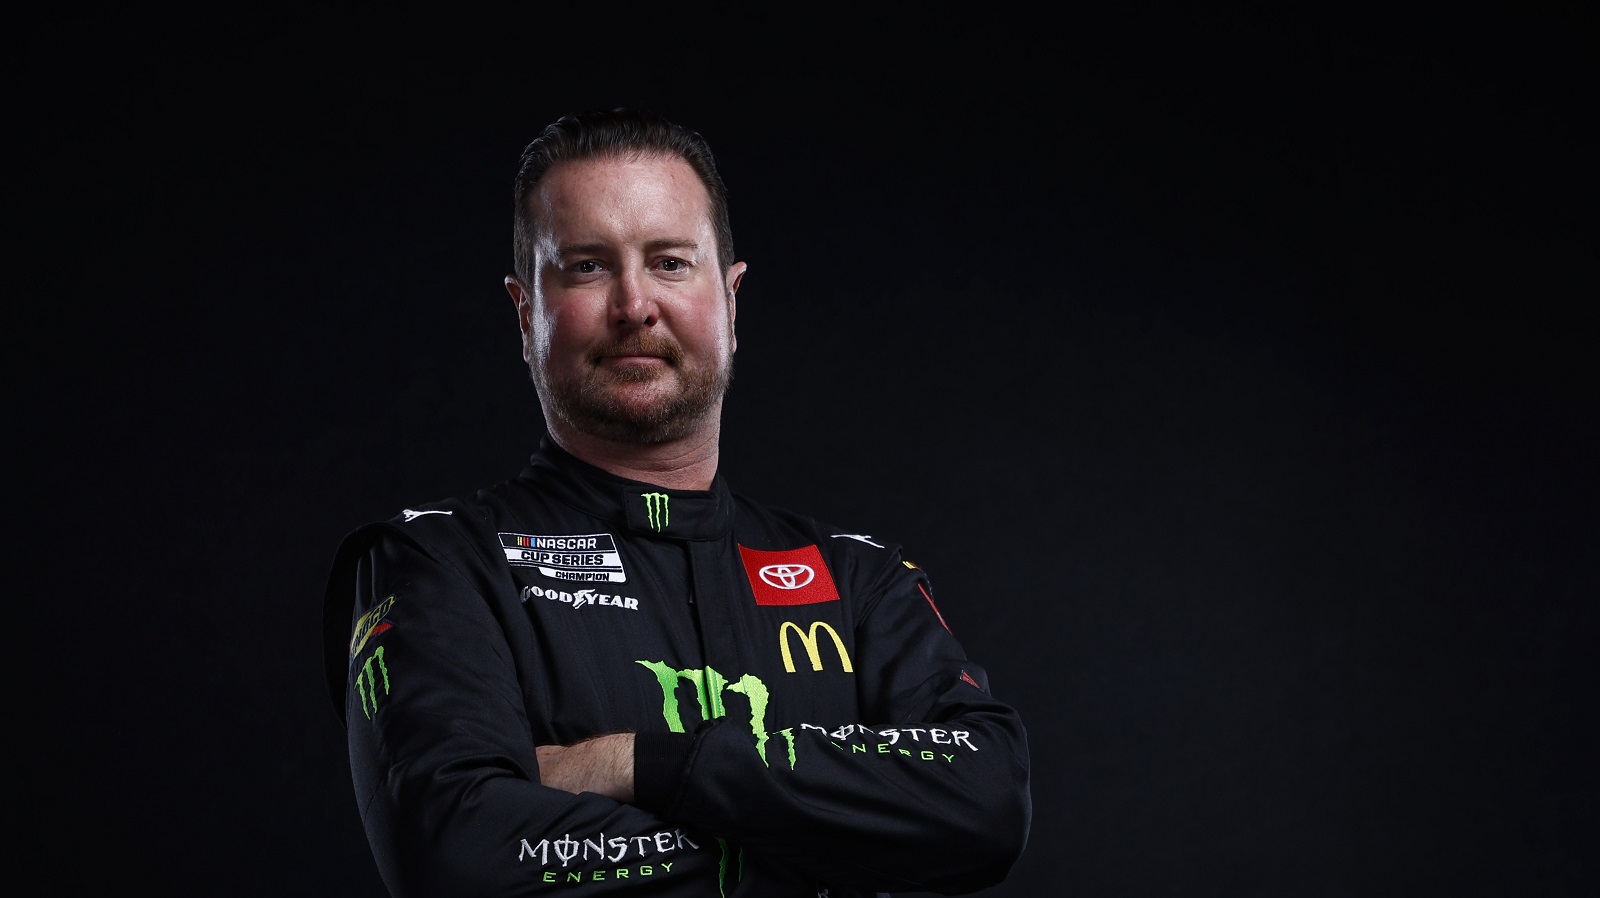 NASCAR driver Kurt Busch poses for a photo during NASCAR Production Days at Clutch Studios on Jan. 19, 2022, in Concord, North Carolina.